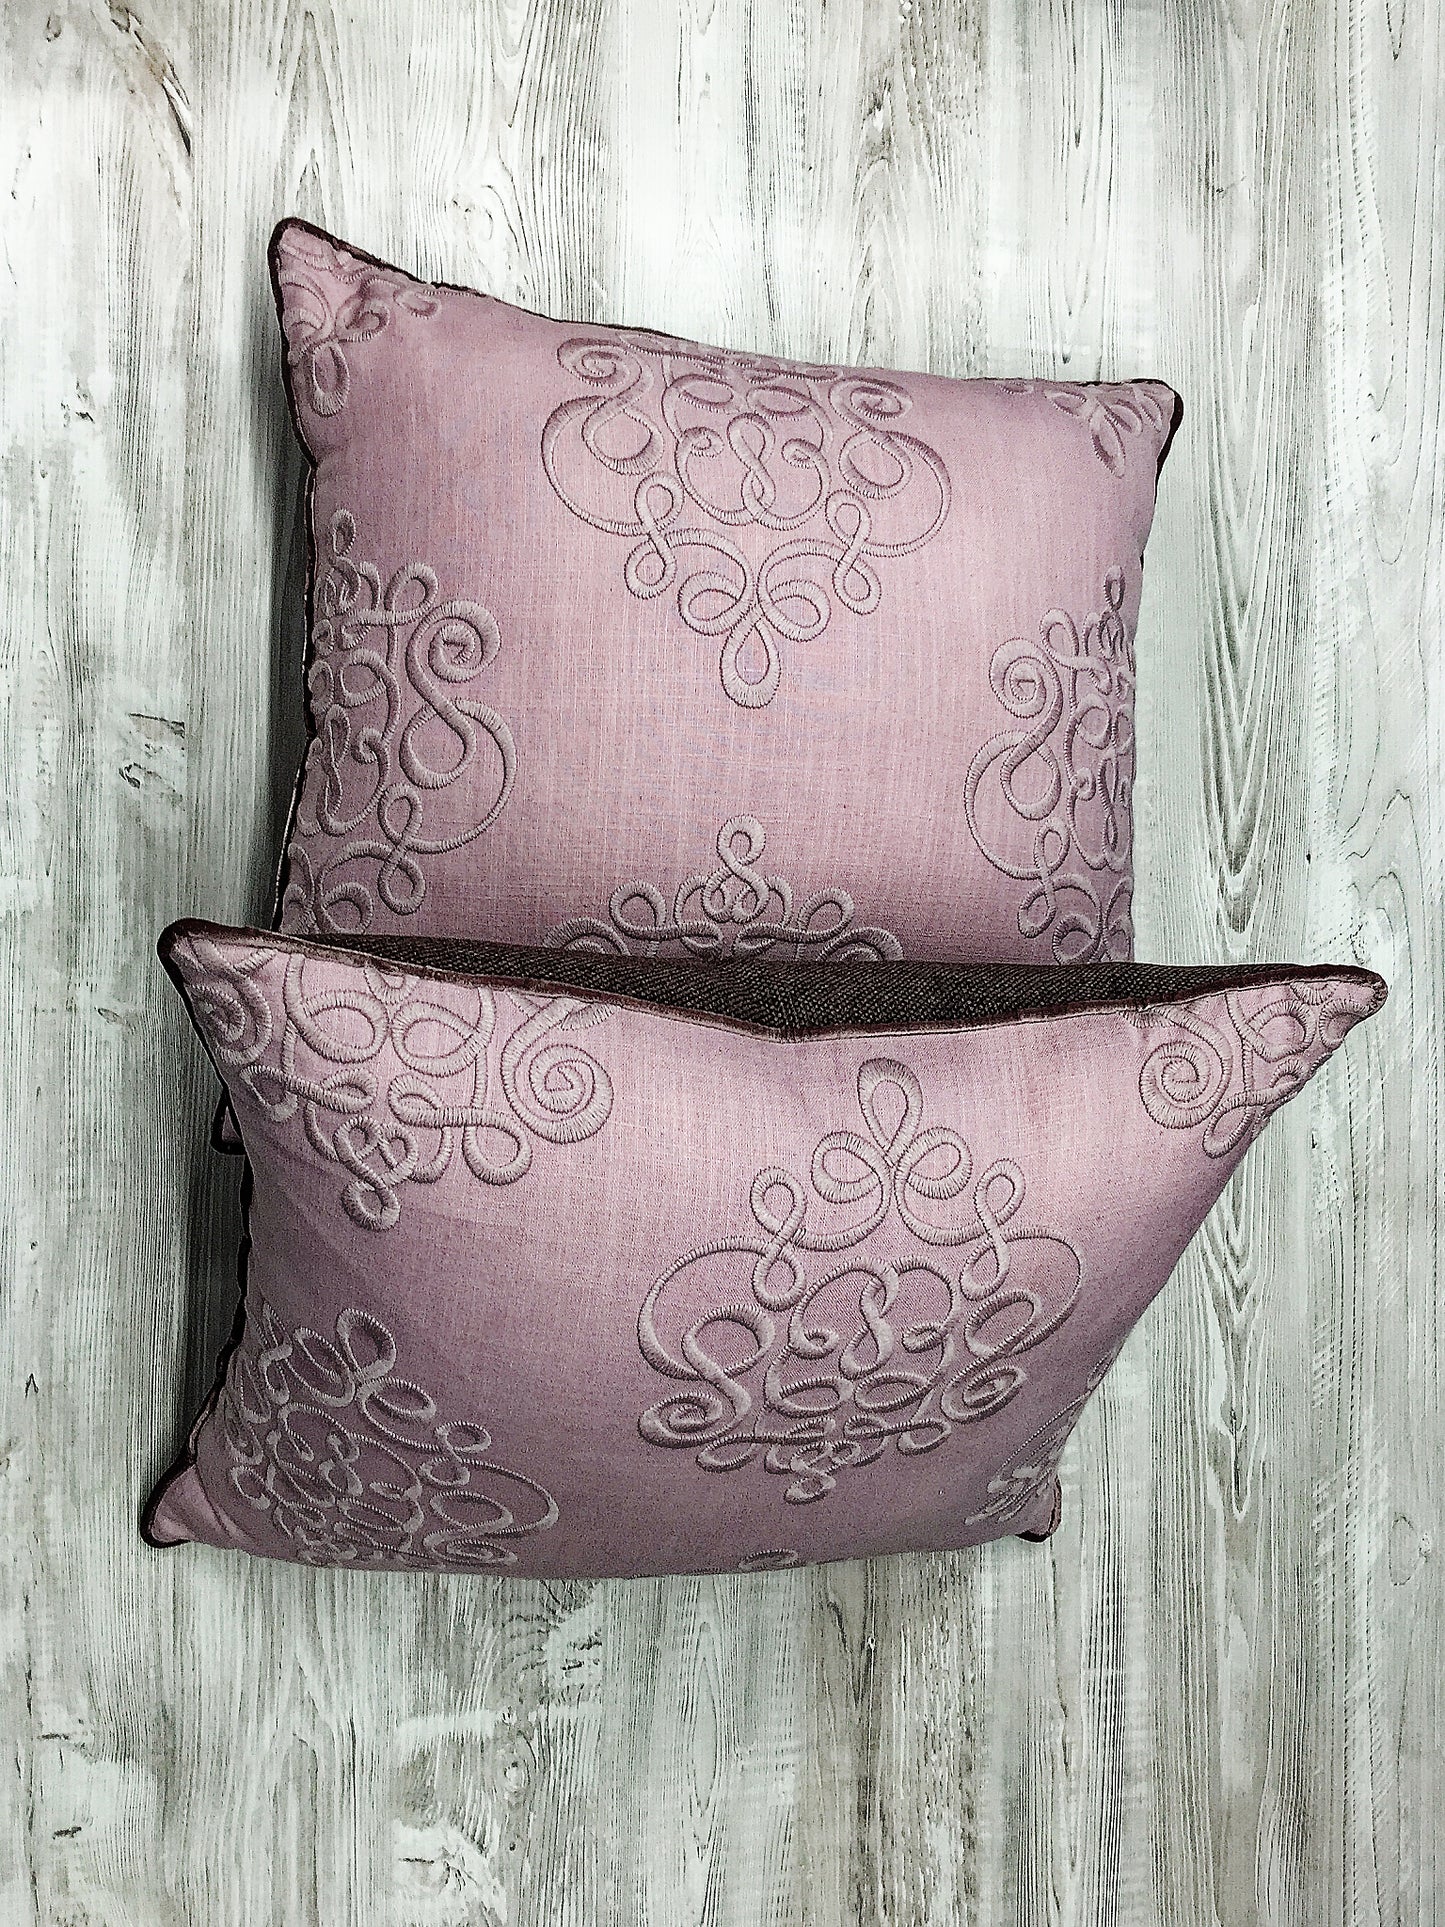 Luxury cushion "Exquisiteness and Soul"